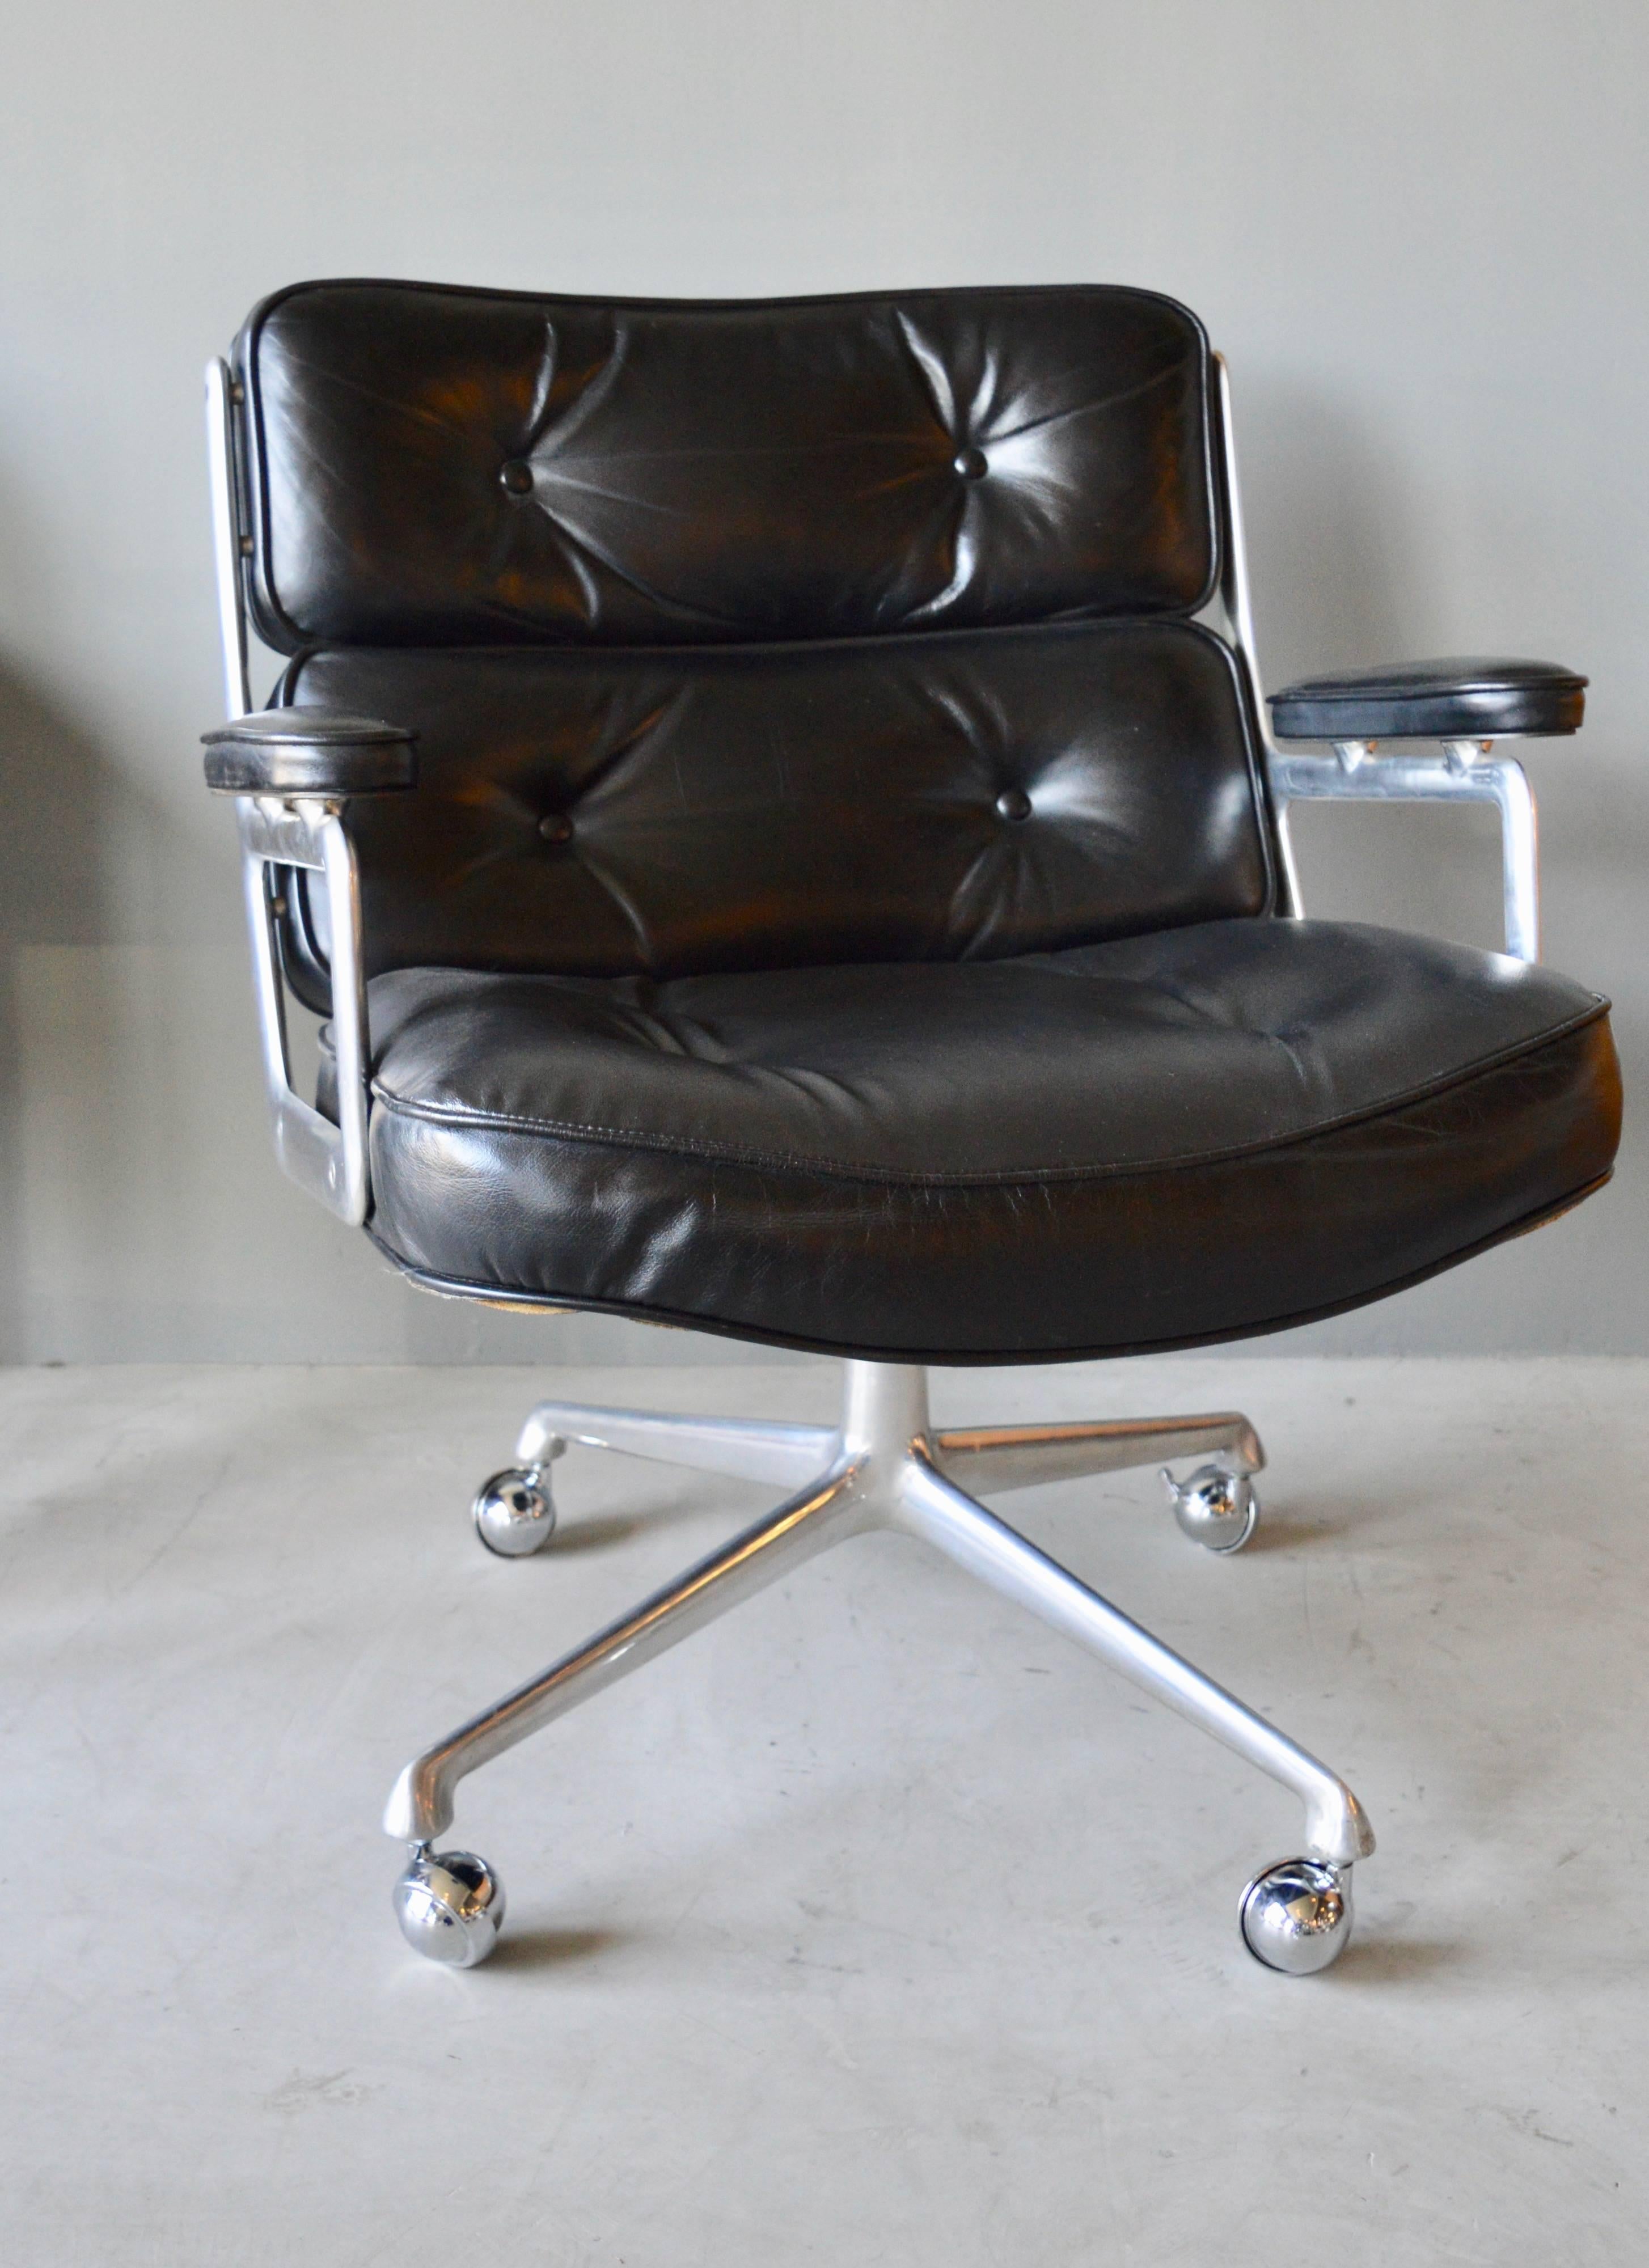 Great vintage black leather lobby chair from the Time Life building in New York. Original black leather in great vintage condition. Original label on underside of chair. Original aluminum frame also in very good vintage condition. Chair does not